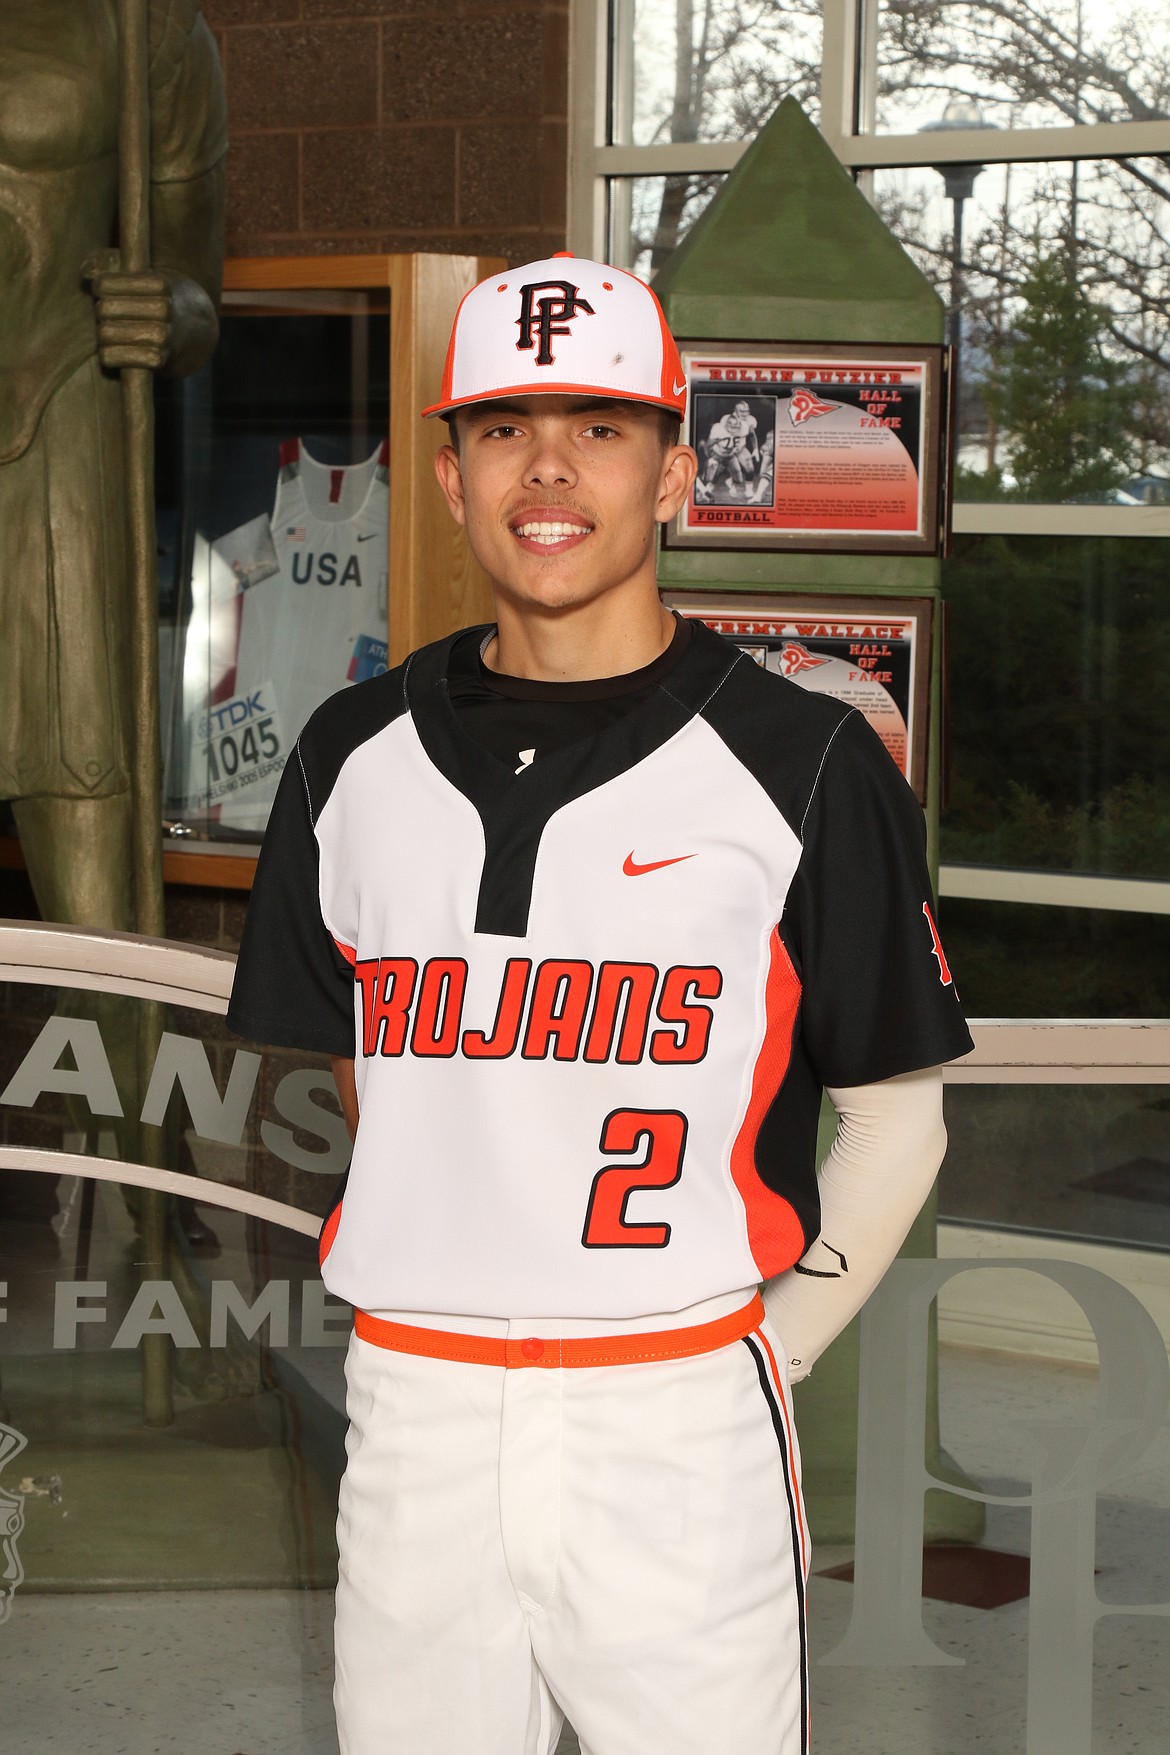 Courtesy photo Senior baseball player Spencer Zeller is this week's Post Falls High School Athlete of the Week. Zeller had an .889 on-base percentage over the weekend, including 2 singles and a double. He also scored 6 runs and played very well in center field in the doubleheader vs Lewiston.